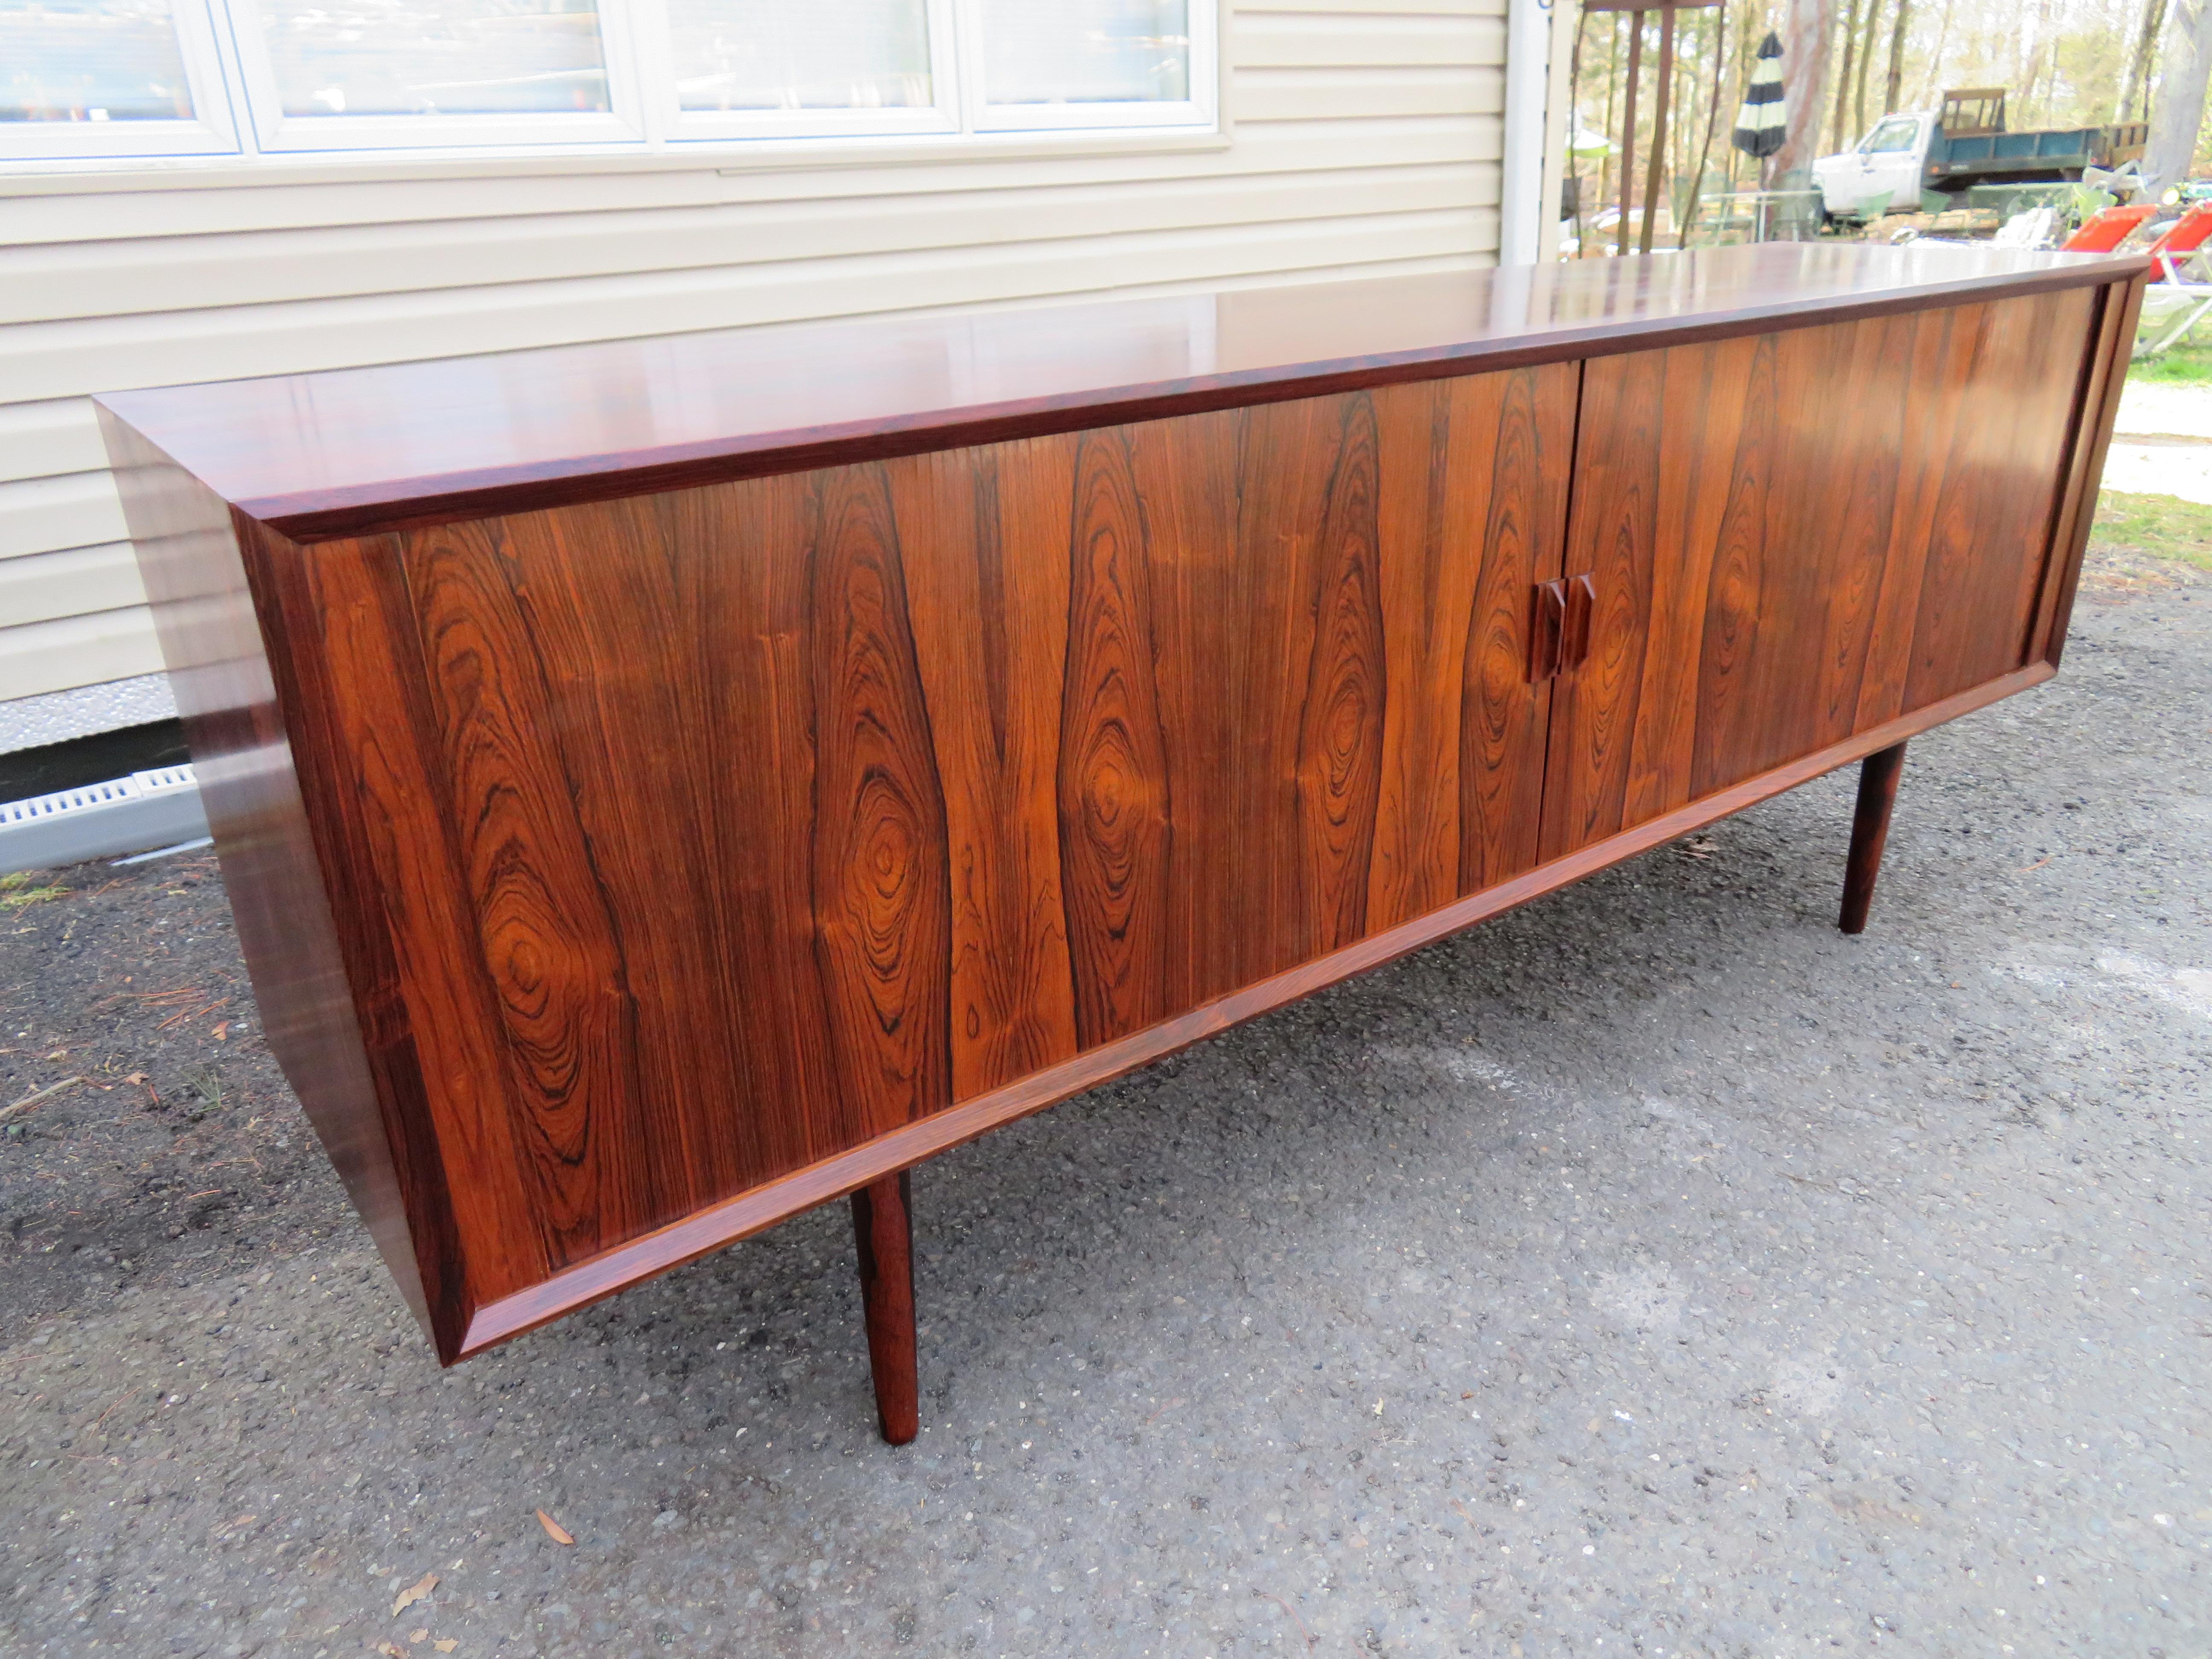 Wonderful Danish modern rosewood credenza by designed Ib Kofod-Larsen manufactured by Faarup Mobelfabrik. This piece features beautiful Brazilian Rosewood graining, tambour doors, adjustable shelves and four green felt-lined drawers. This one has